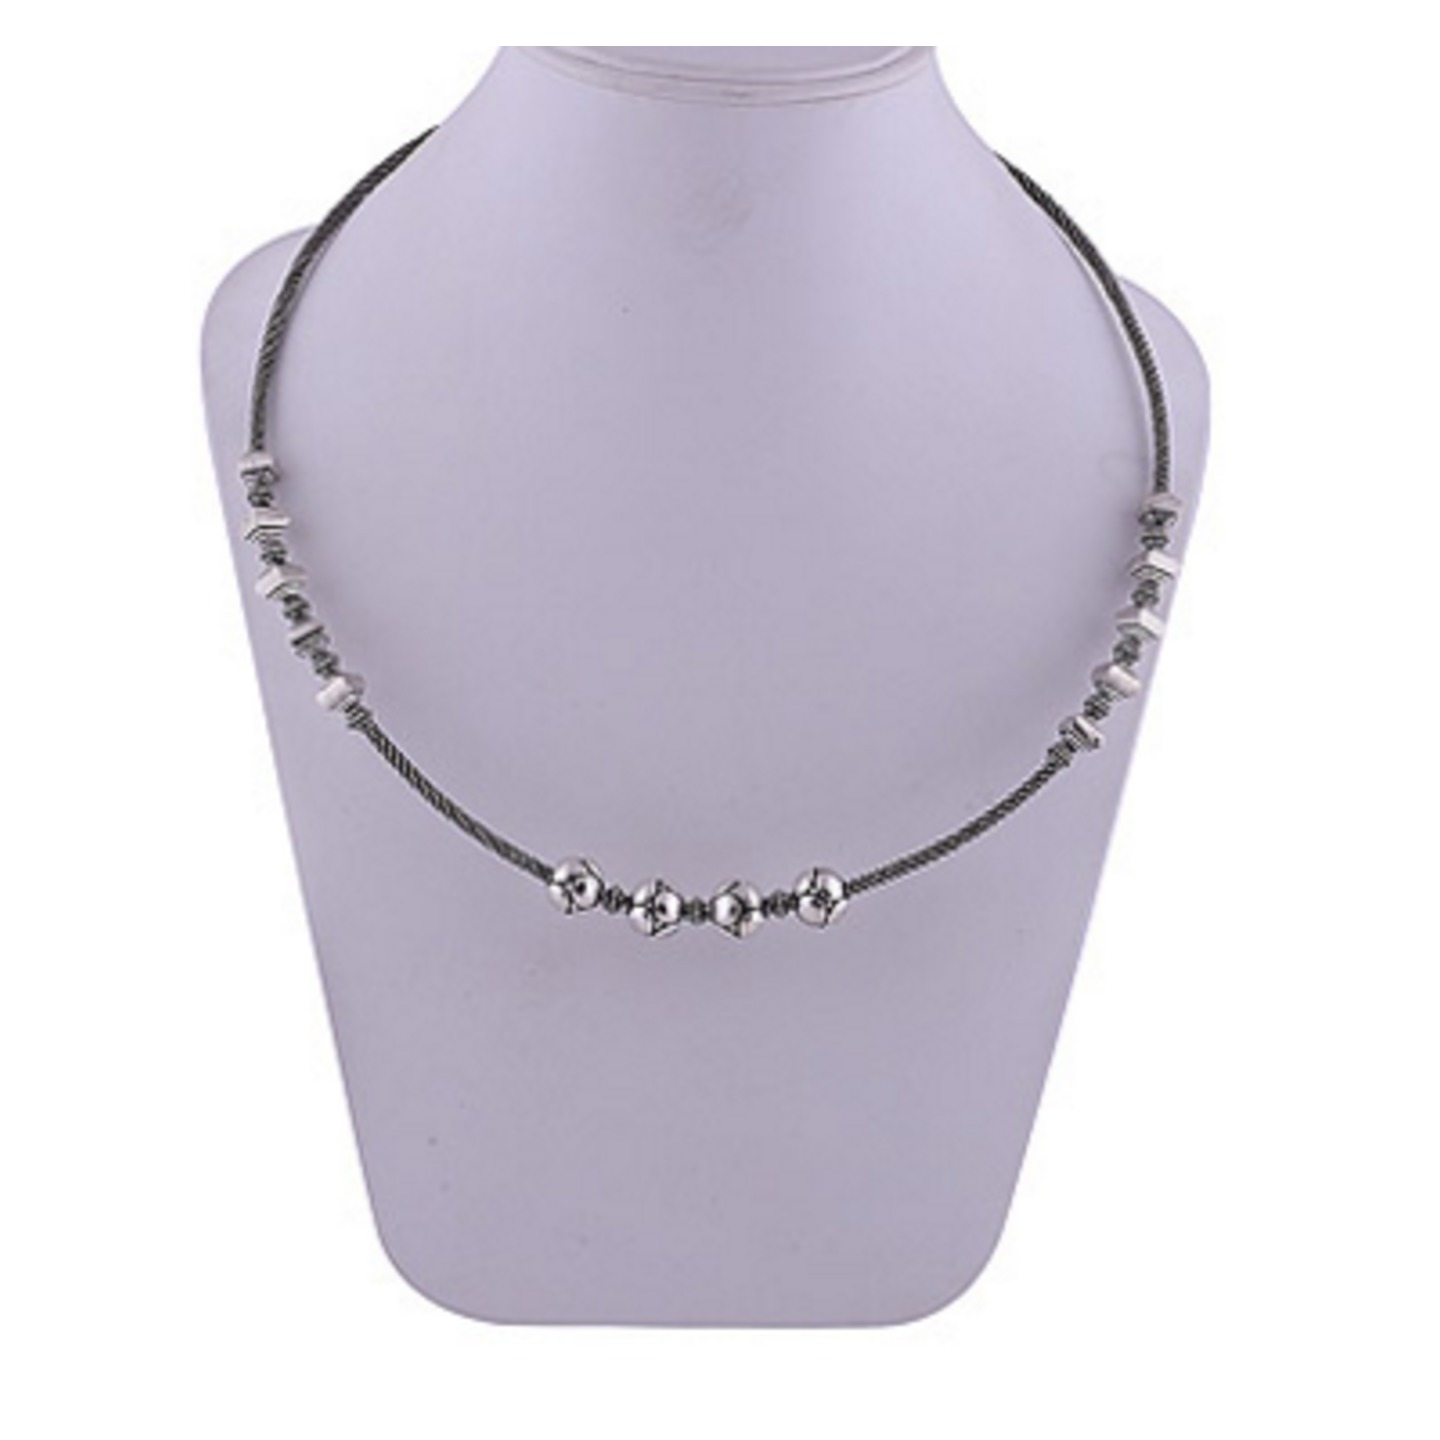 The Bead n Square Silver Necklace